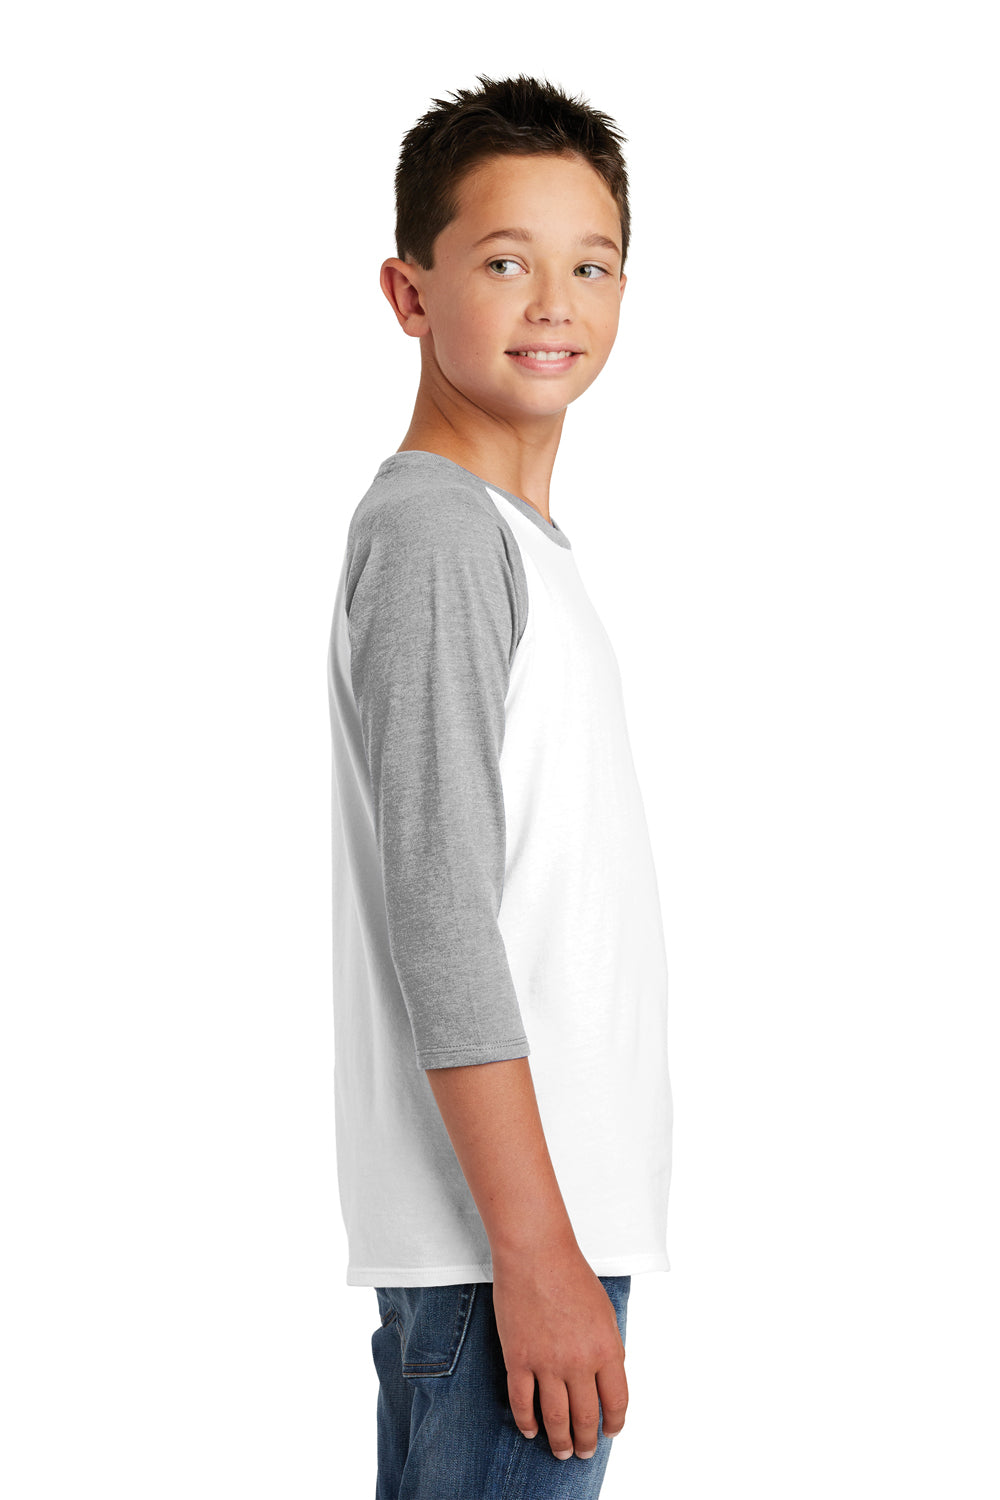 District DT6210Y Youth Very Important 3/4 Sleeve Crewneck T-Shirt White/Heather Light Grey Side